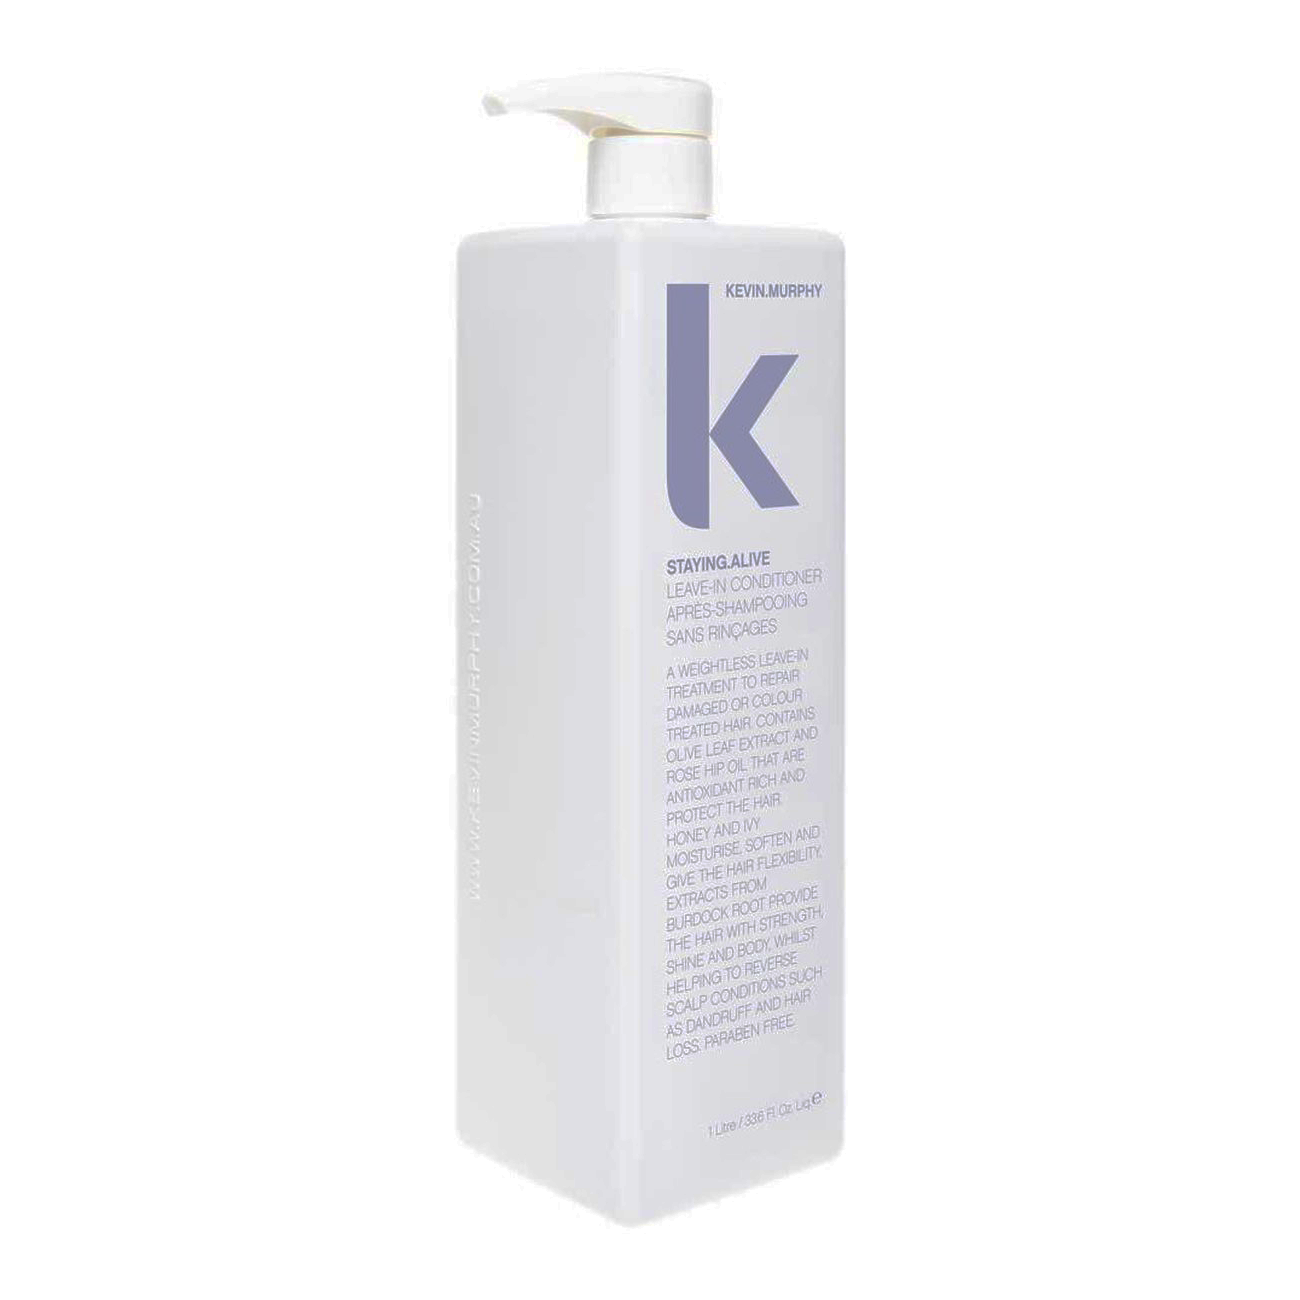 Kevin Murphy STAYING.ALIVE LEAVE IN TREATMENT (Buy 3 Get 1 Free Mix & Match)